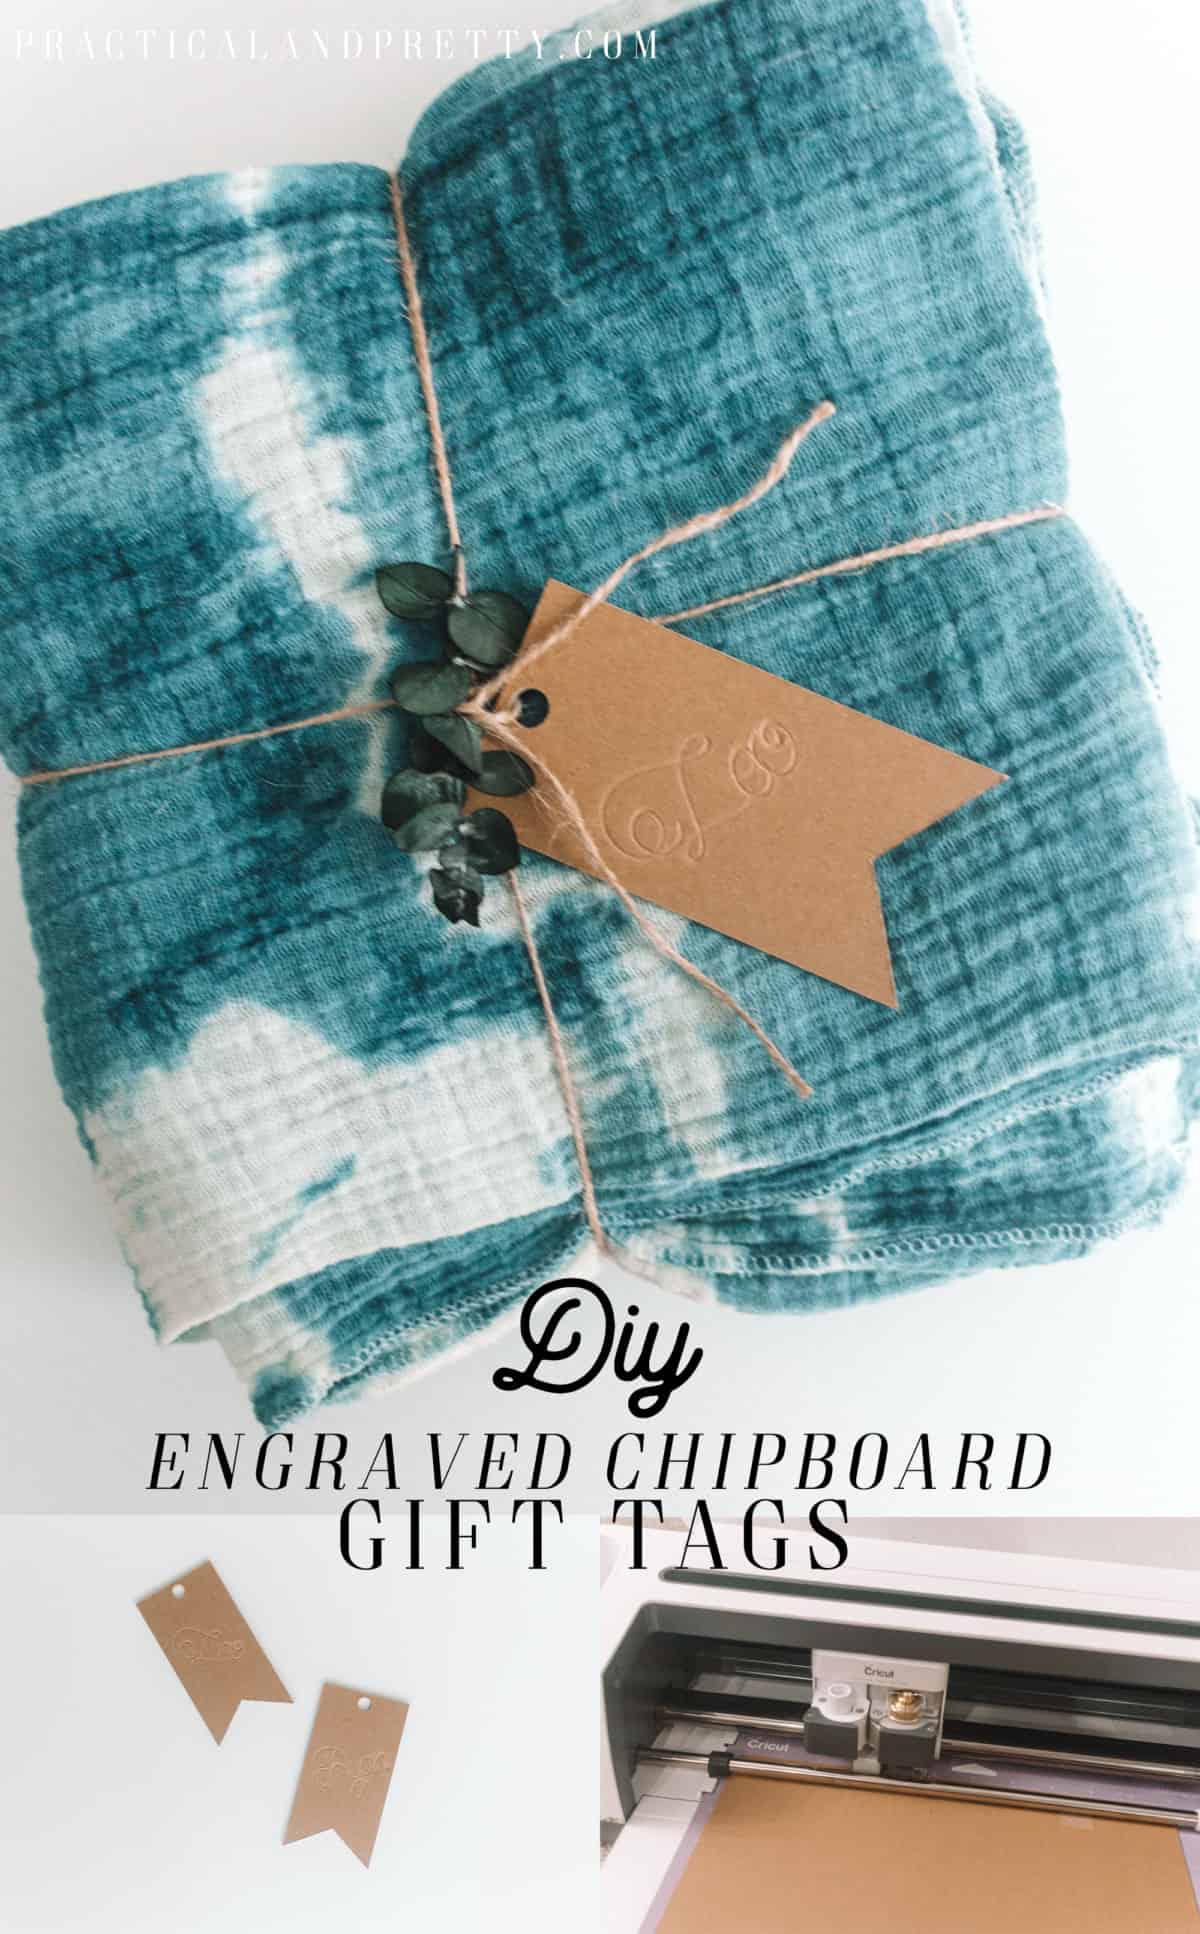 Use this free gift tag cut file and engrave anything you want onto them using your knife blade and scoring wheel with your Cricut!